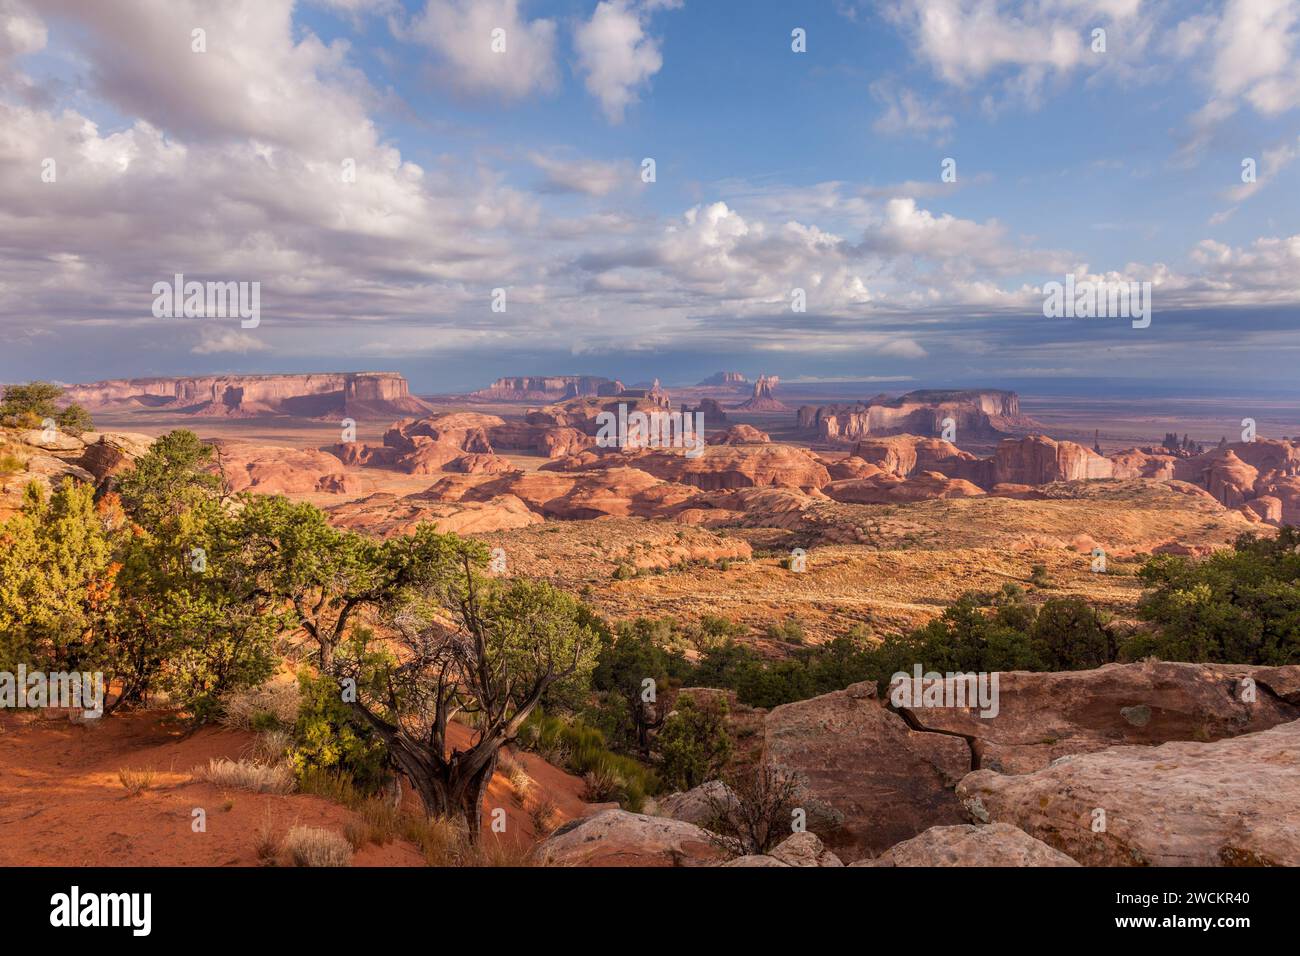 Morning view of the monuments in the Monument Navajo Valley Tribal Park in Arizona.  Viewed from Hunt's Mesa. Stock Photo